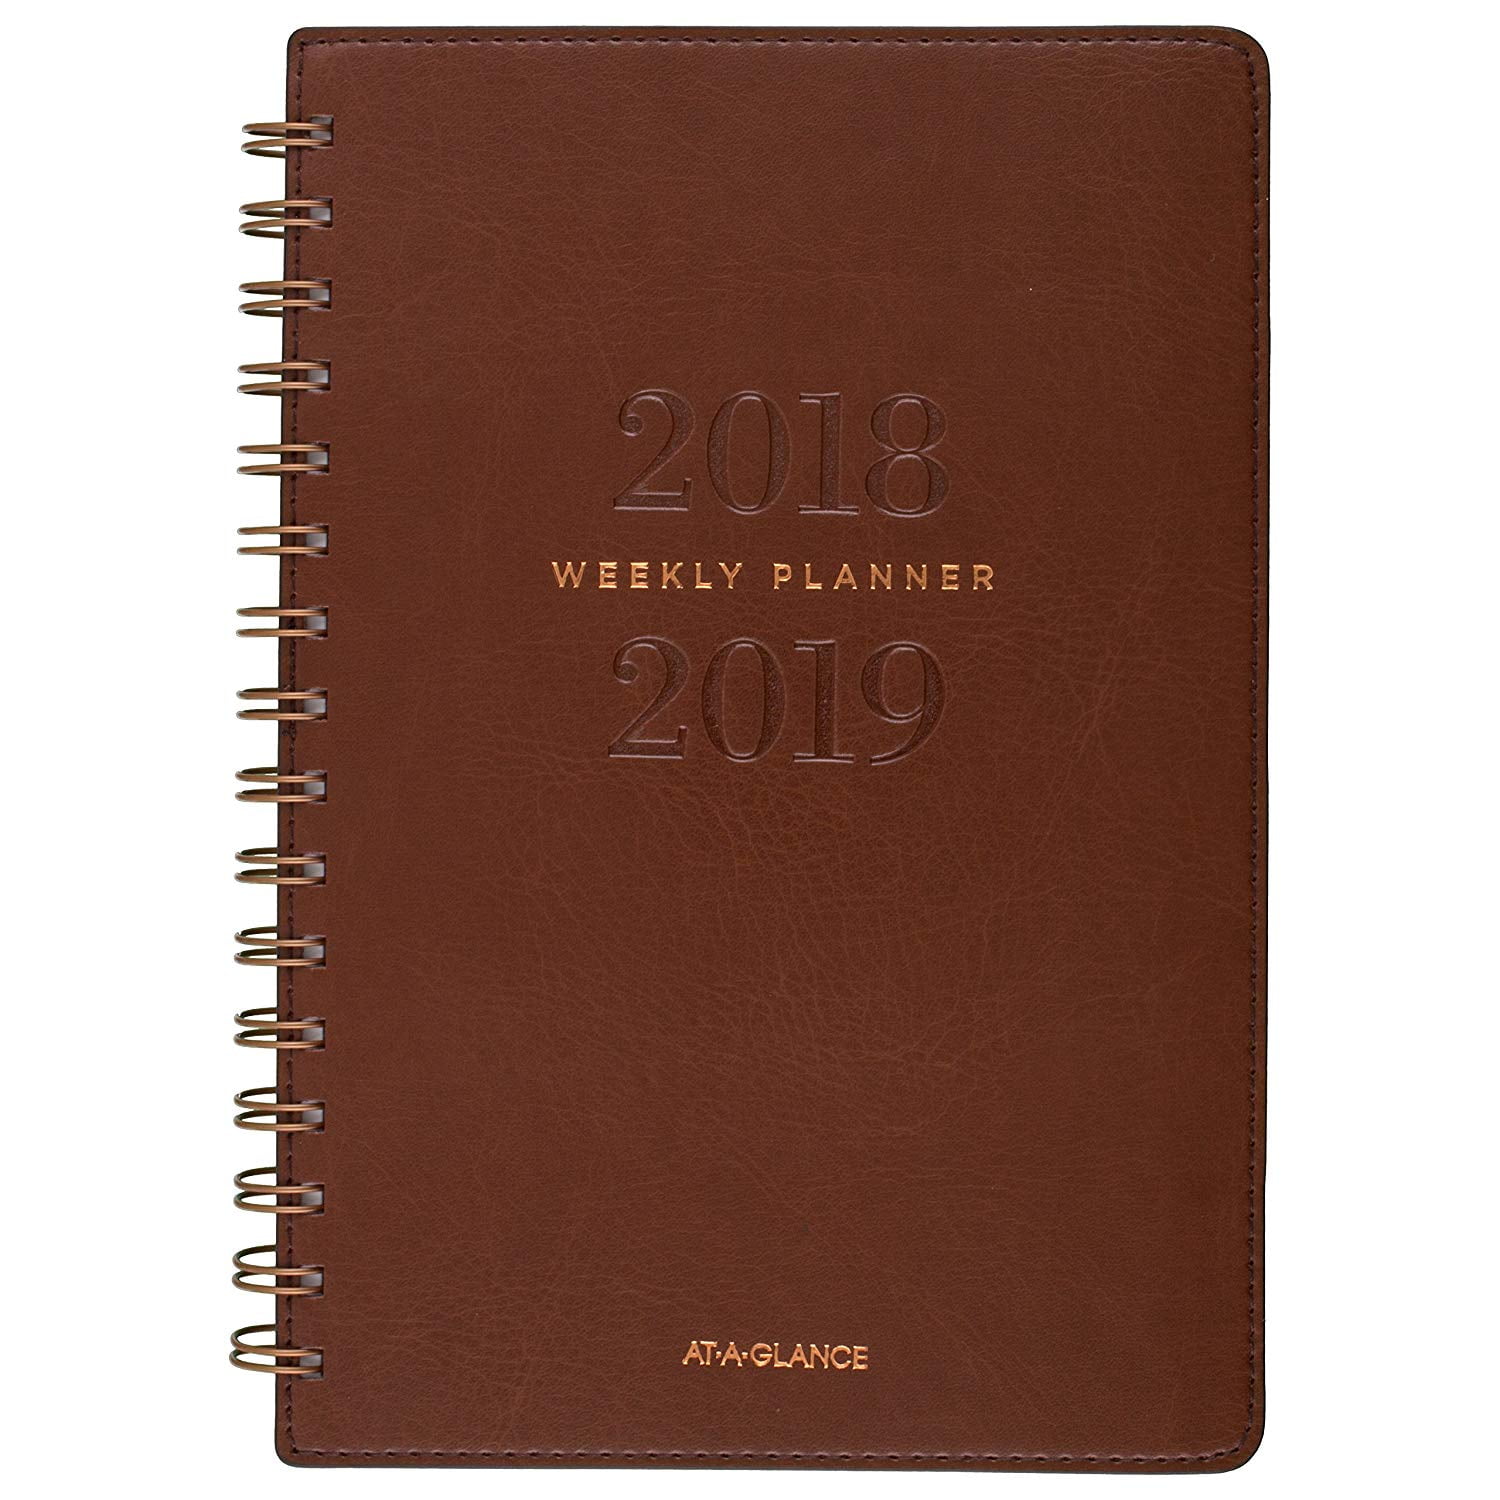 2019 Planner Calendar Tabbed Student Agenda Appointment Book Journal BROWN 6x8 